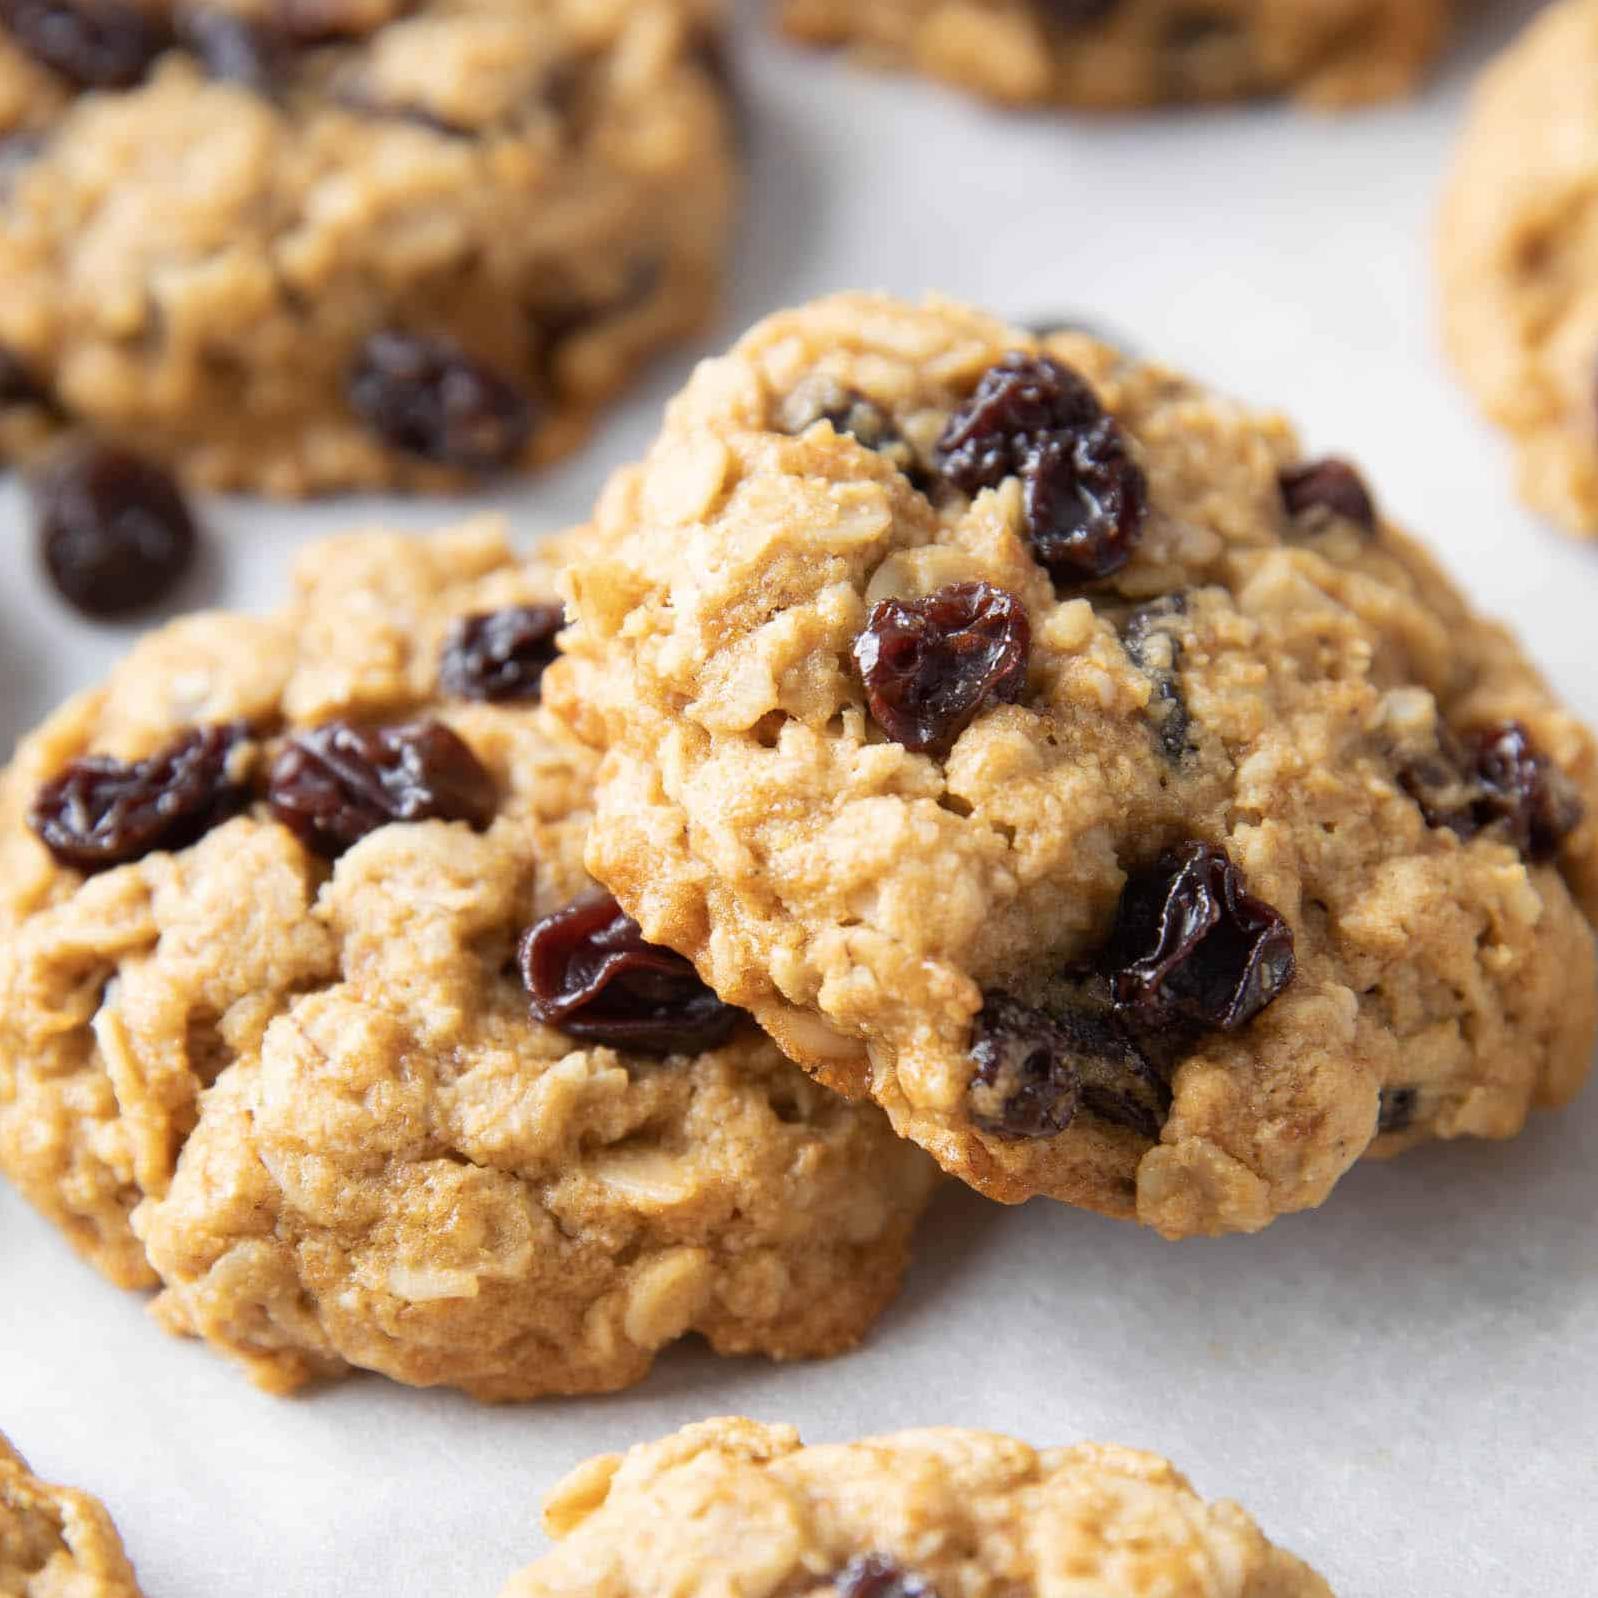  Perfect with a cup of coffee or tea, these oatmeal raisin cookies will satisfy your sweet tooth.